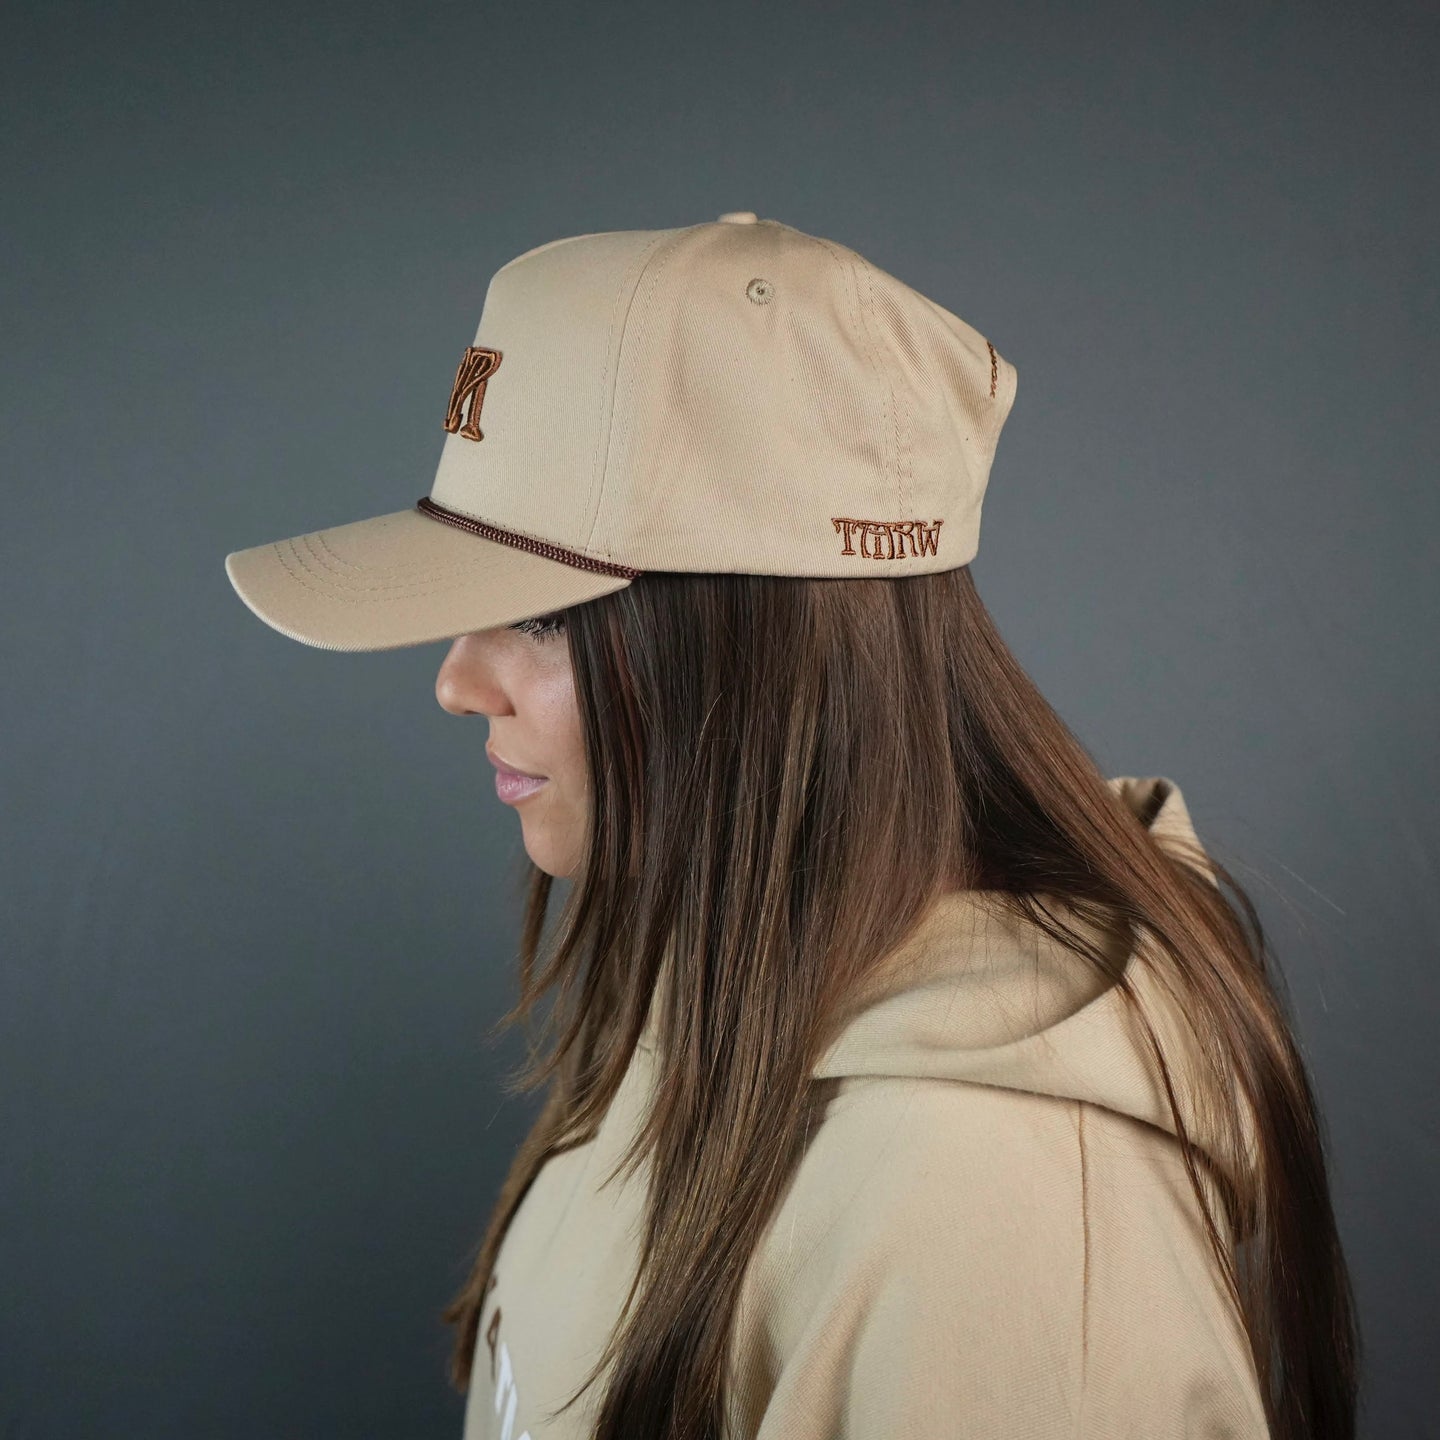 NEW BEGINNING "NO WORDS" 5 PANEL HAT IN SAND